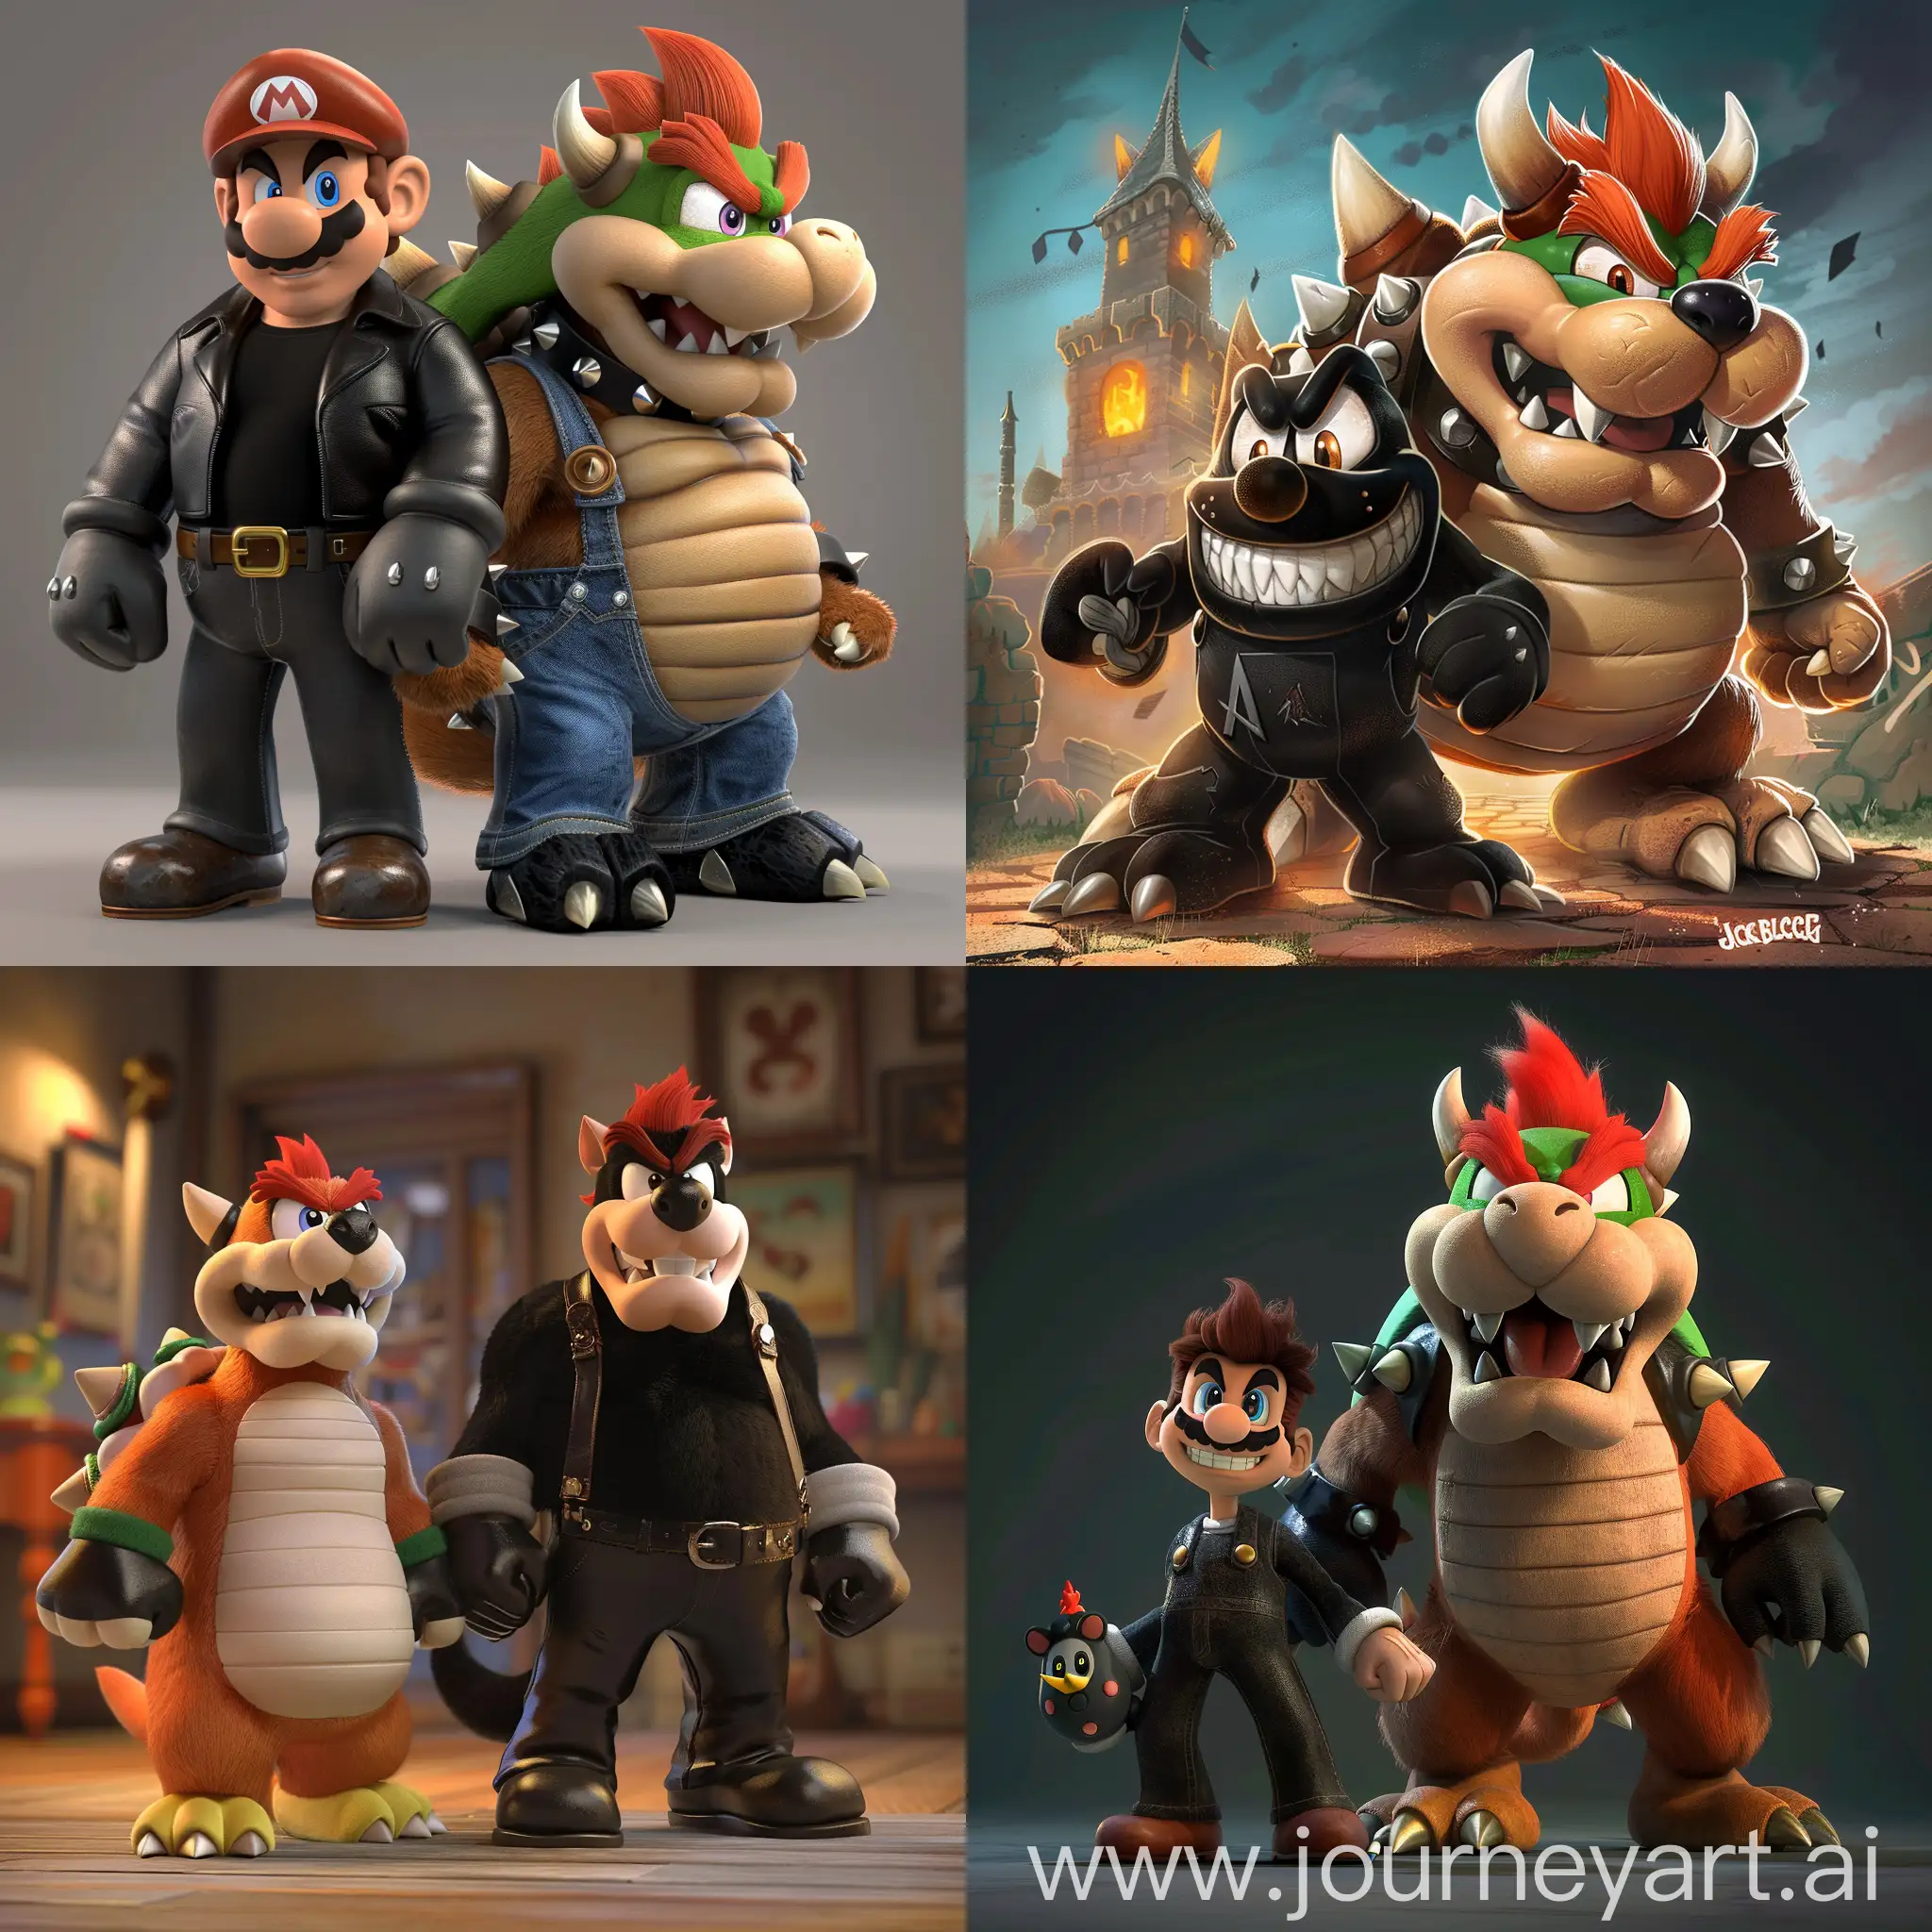 Bowser-and-Jack-Black-in-a-Comedic-Standoff